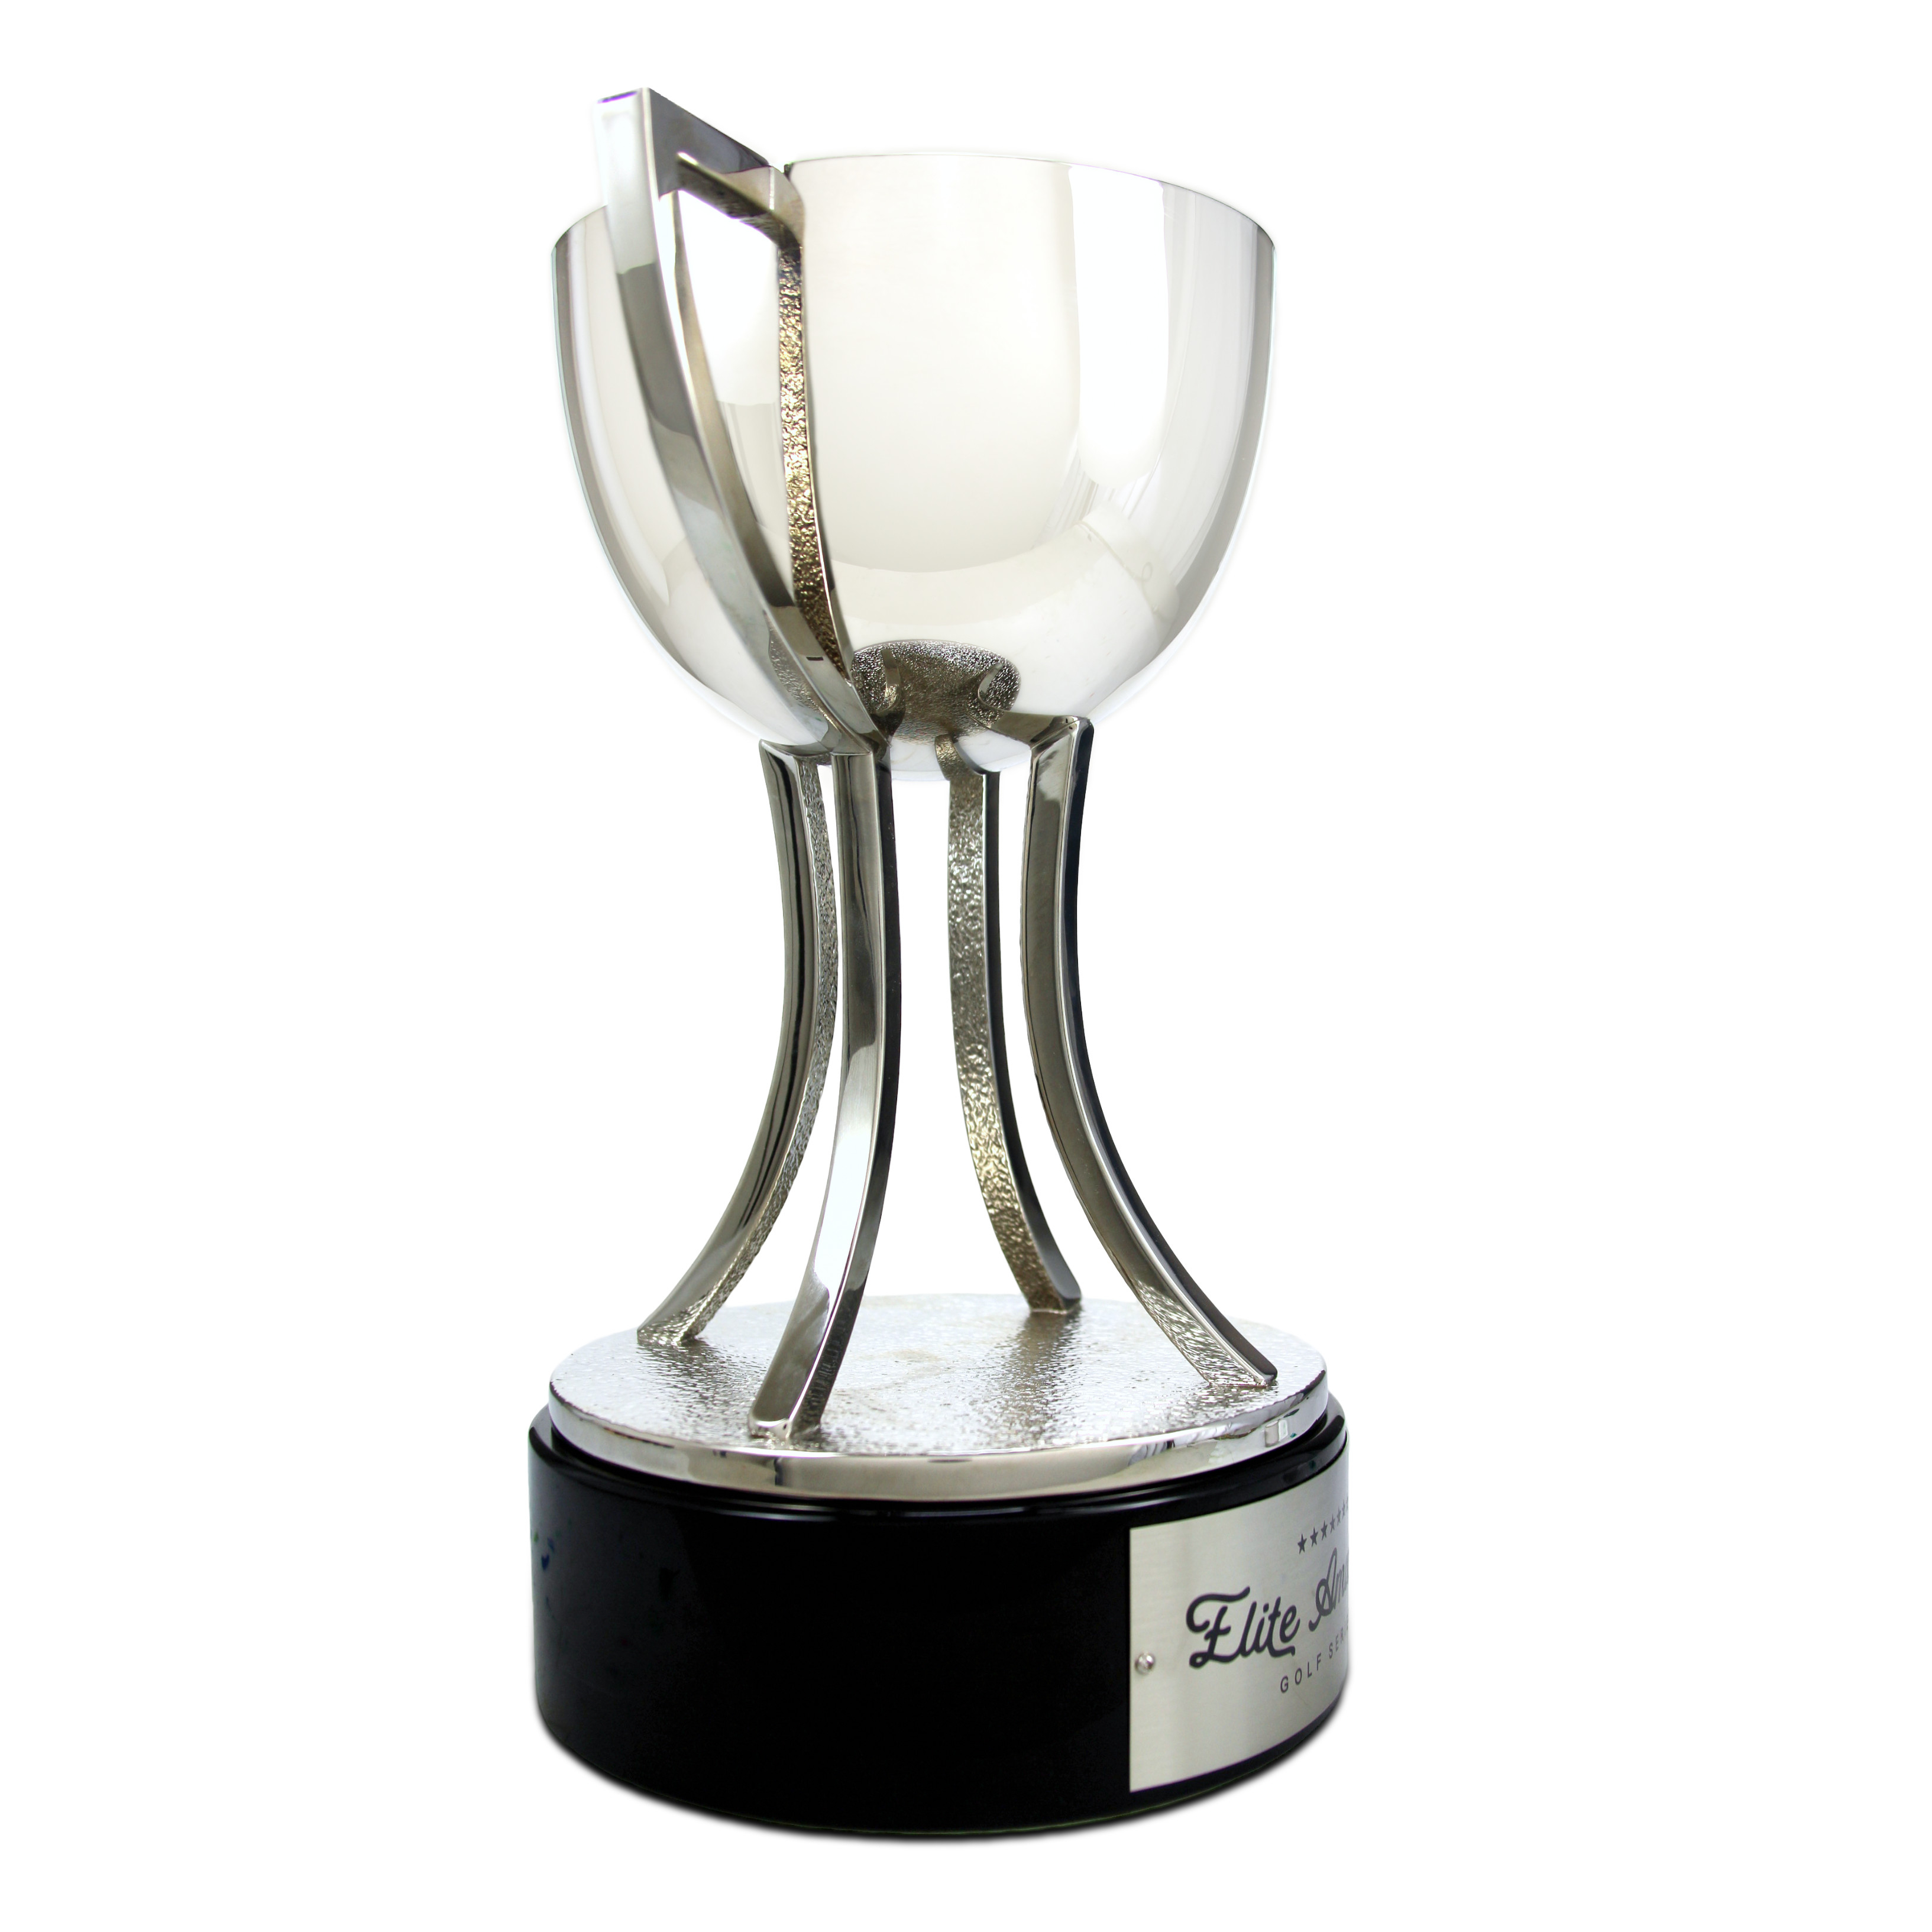 Elite Amateur Cup made by Malcolm DeMille